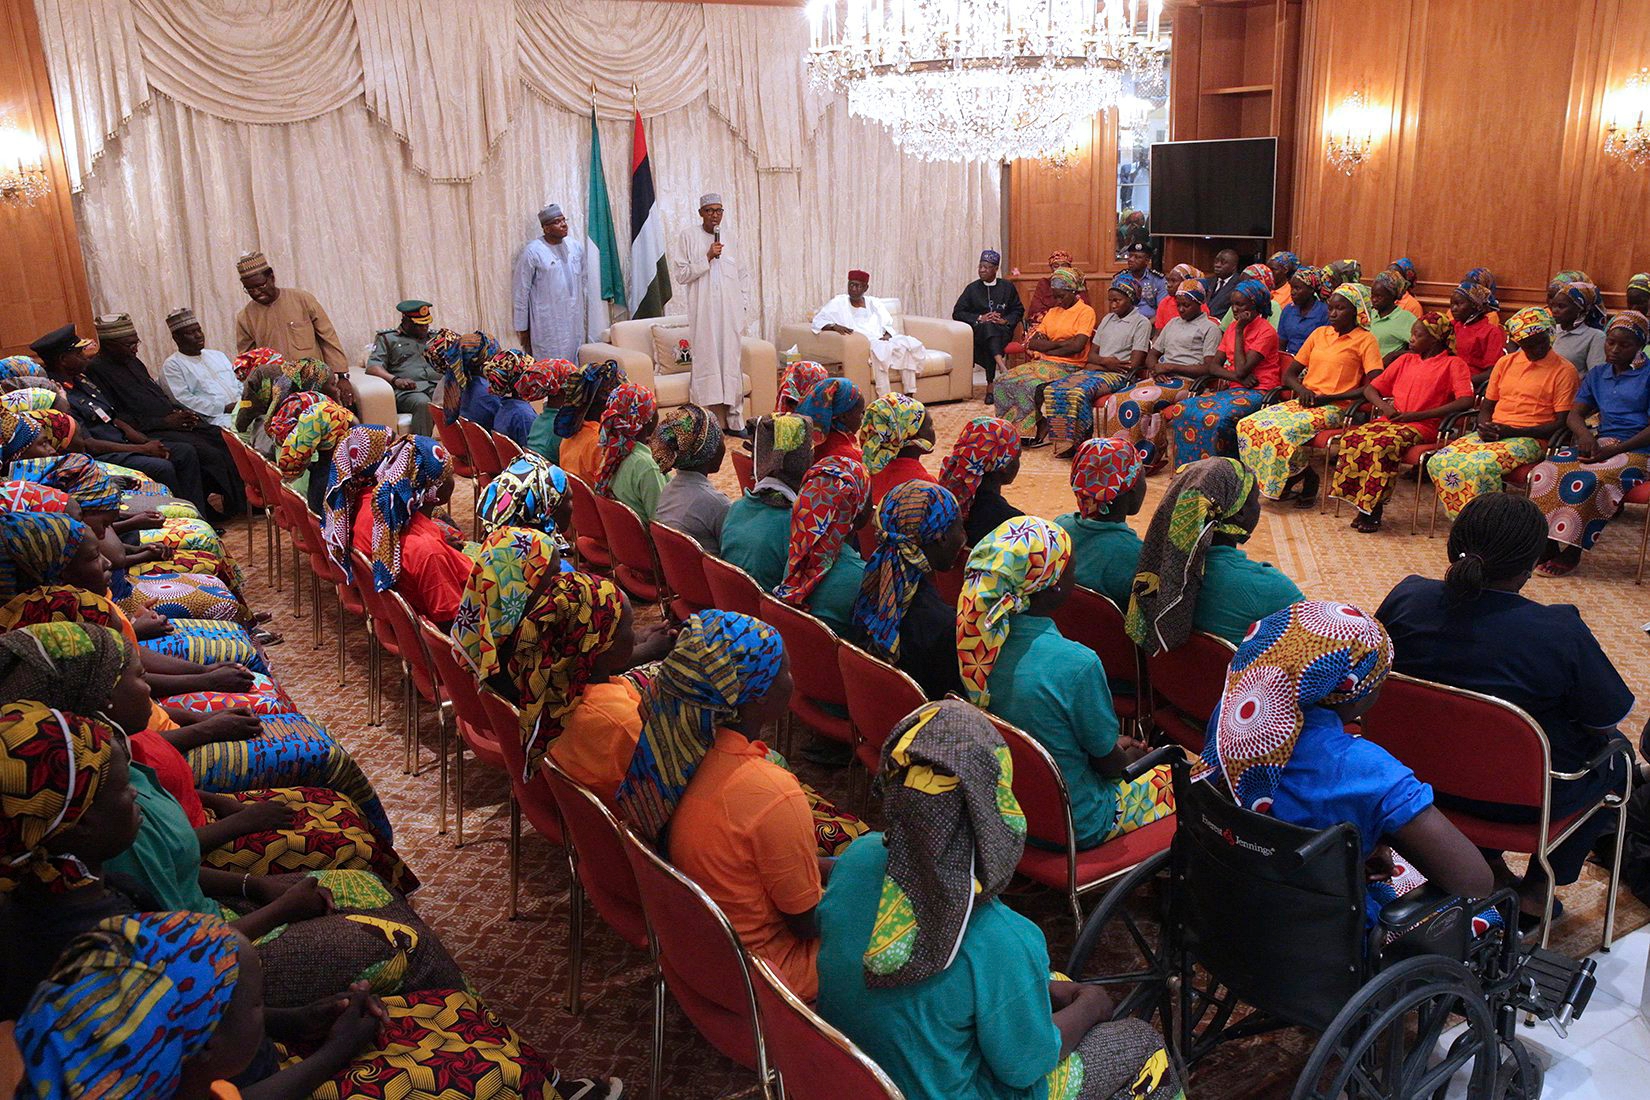 In this photo released by the Nigeria State House, Nigeria's President, Muhammadu Buhari, centre, meets with Chibok school girls recently freed from Nigeria Extremist captivity in Abuja, Nigeria, Sunday, May. 7, 2017. Five Boko Haram commanders were released in exchange for the freedom of 82 Chibok schoolgirls kidnapped by the extremist group three years ago, a Nigerian government official said Sunday, as the girls were expected to meet with the country's president and their families. (Bayo Omoboriowo/Nigeria State House via AP) Nigeria Kidnapped Girls